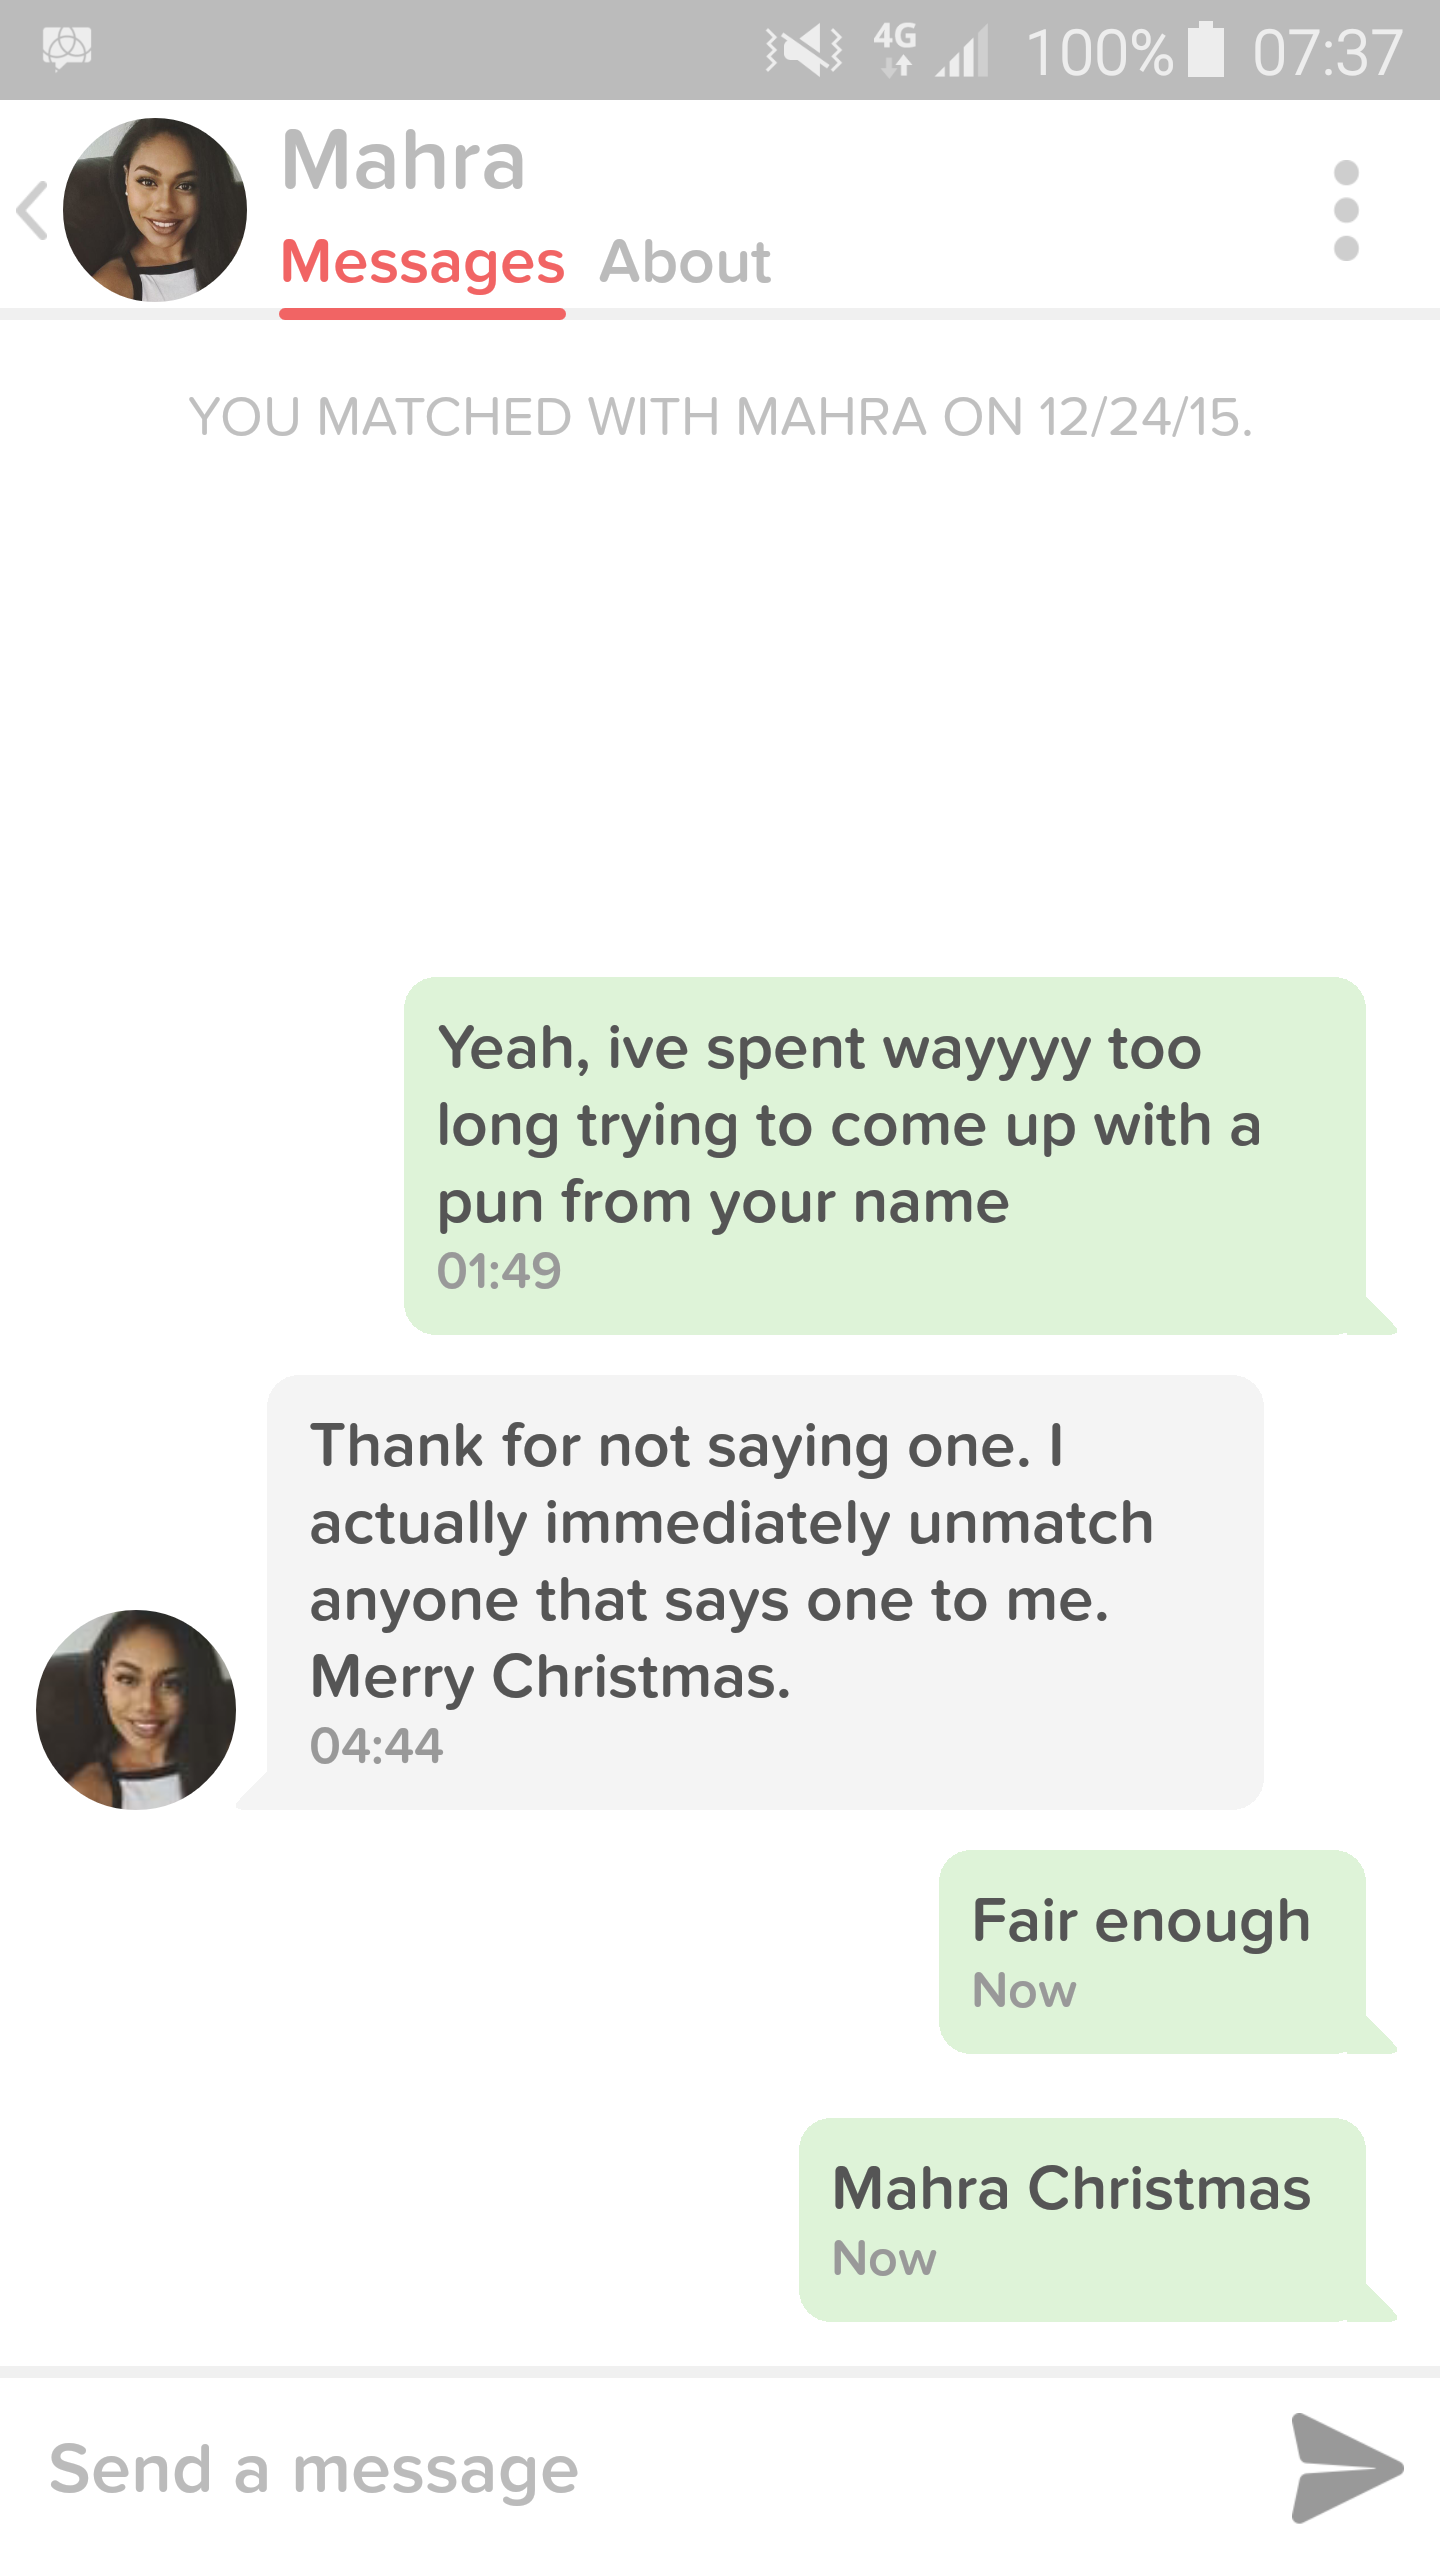 mahra tinder - 46. 100% N Mahra Messages About You Matched With Mahra On 122415. Yeah, ive spent wayyyy too long trying to come up with a pun from your name Thank for not saying one. I actually immediately unmatch anyone that says one to me. Merry Christm